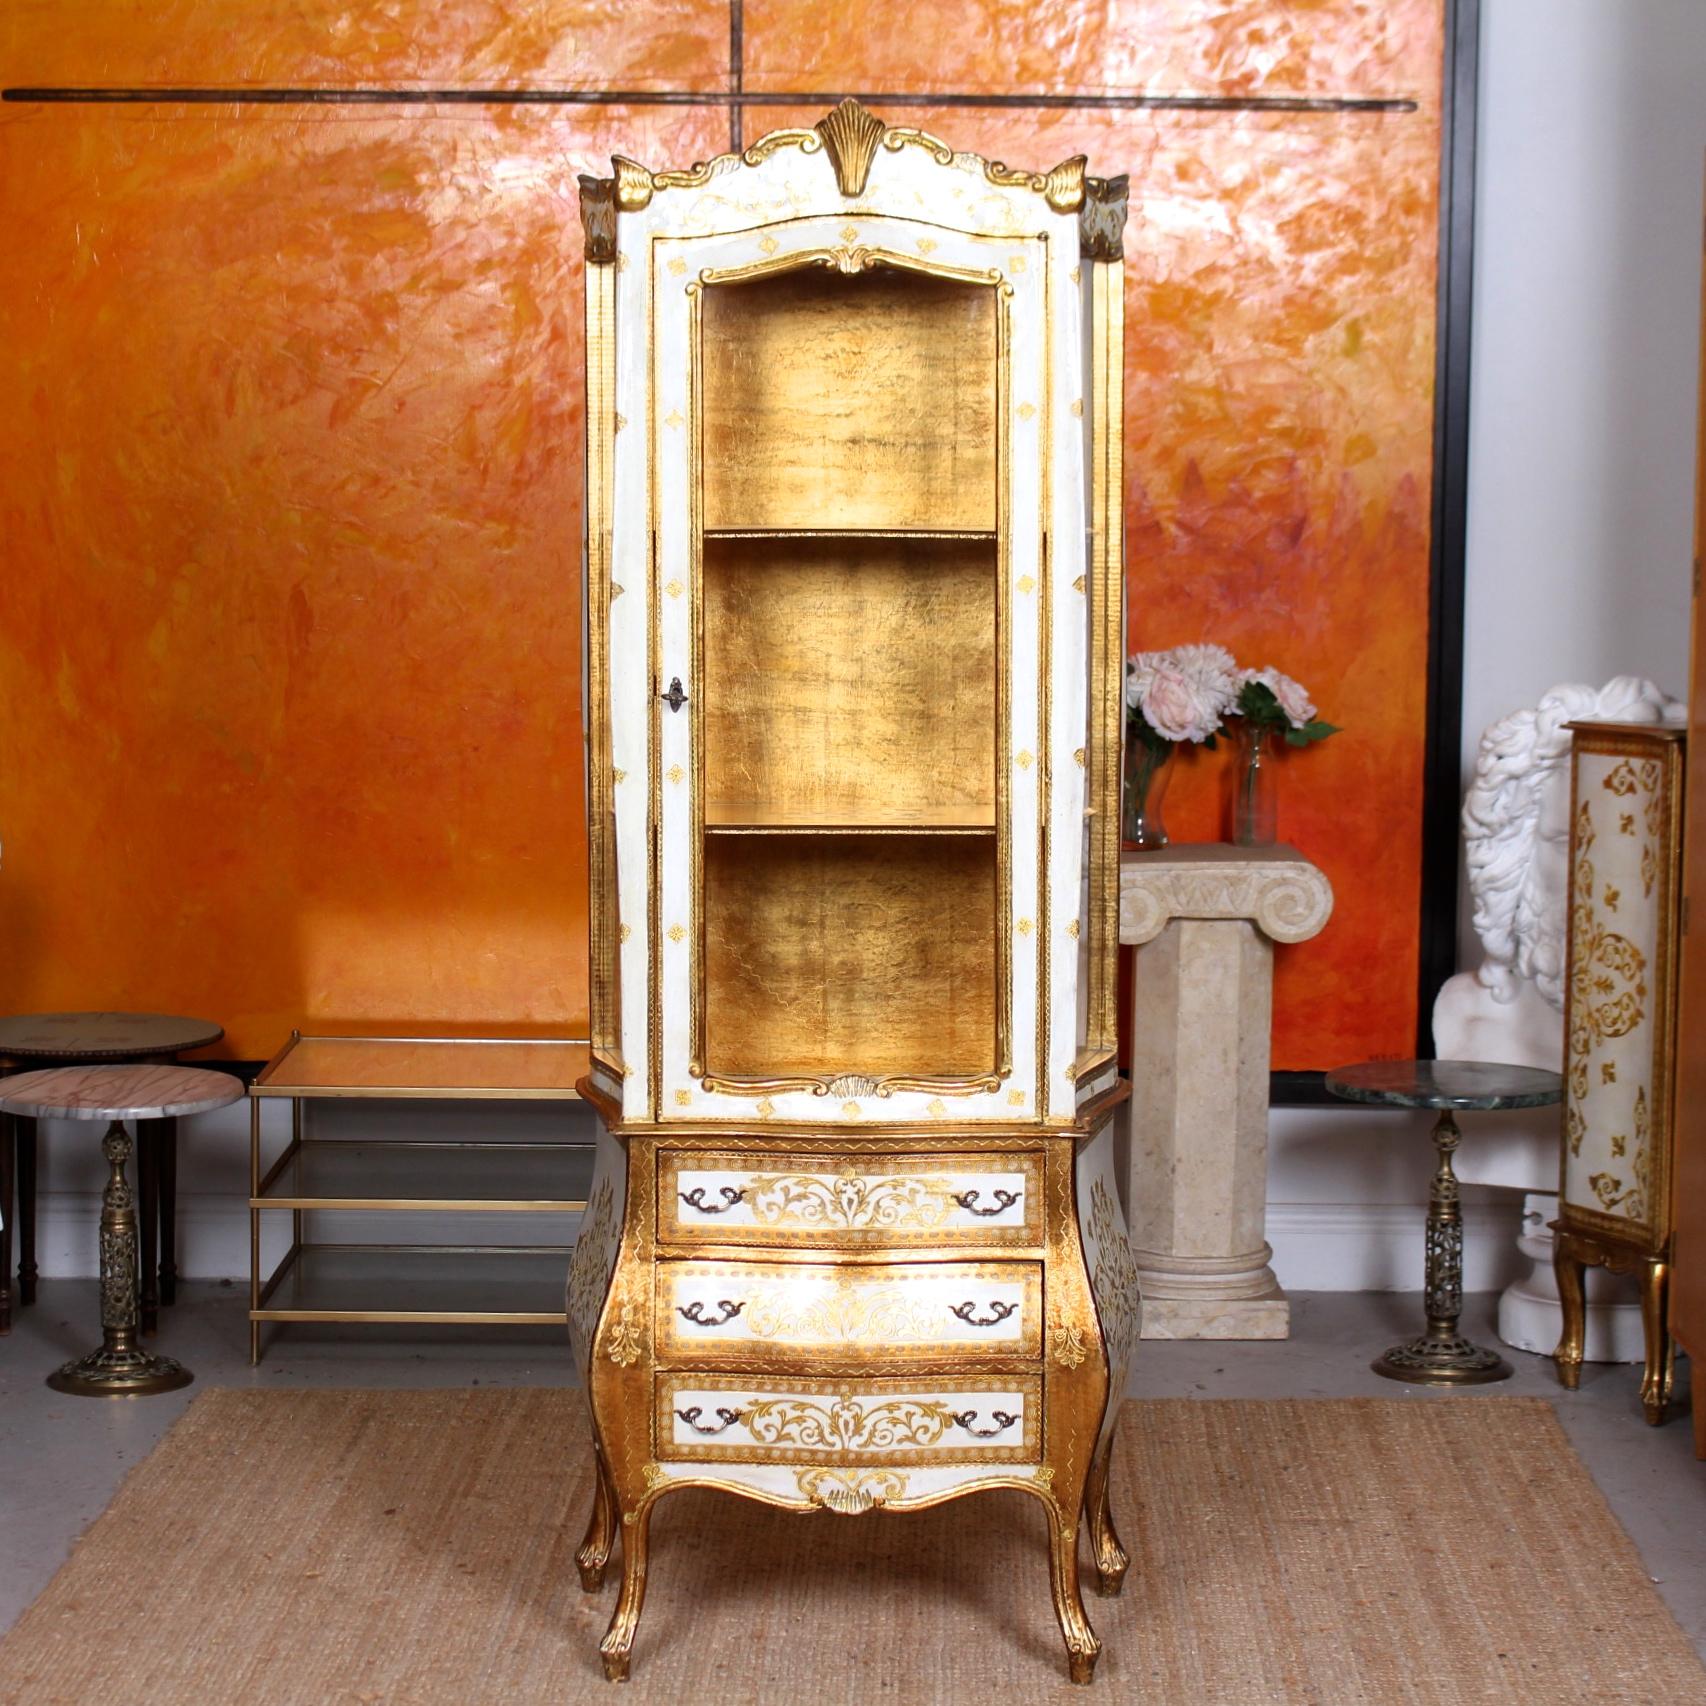 An outstanding Italian display cabinet on chest.

Boasting superb gold gilded detailing and hand painted finish.

The upper section with moulded cornice and shell carved motifs above a glazed paneled door enclosed gilded interior and shelving.